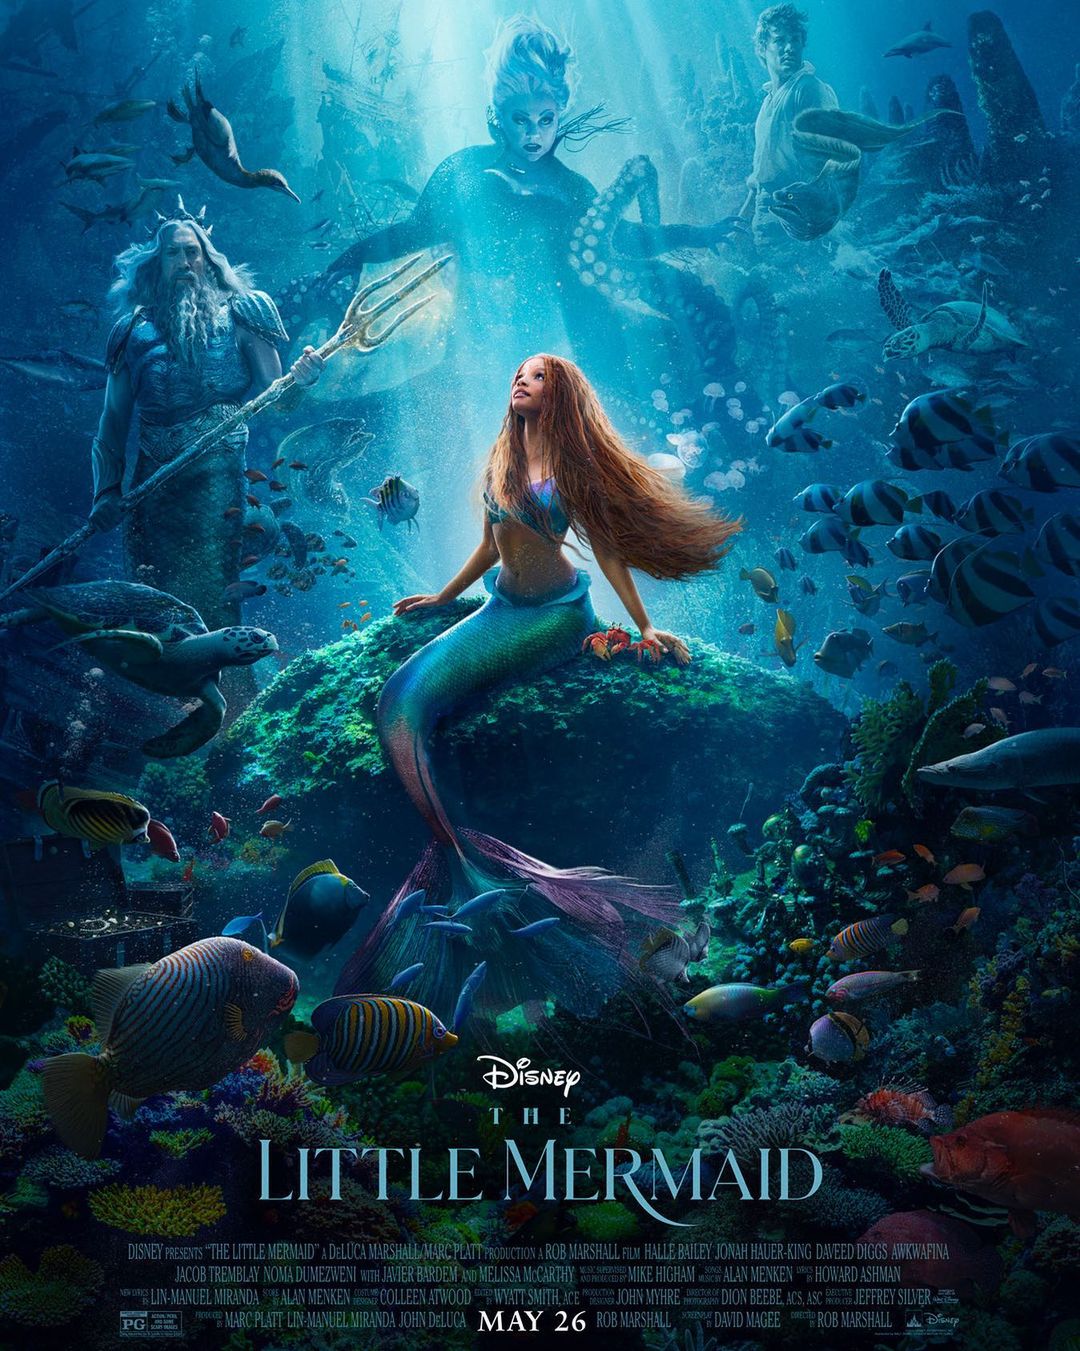 Halle Bailey in the Little Mermaid poster